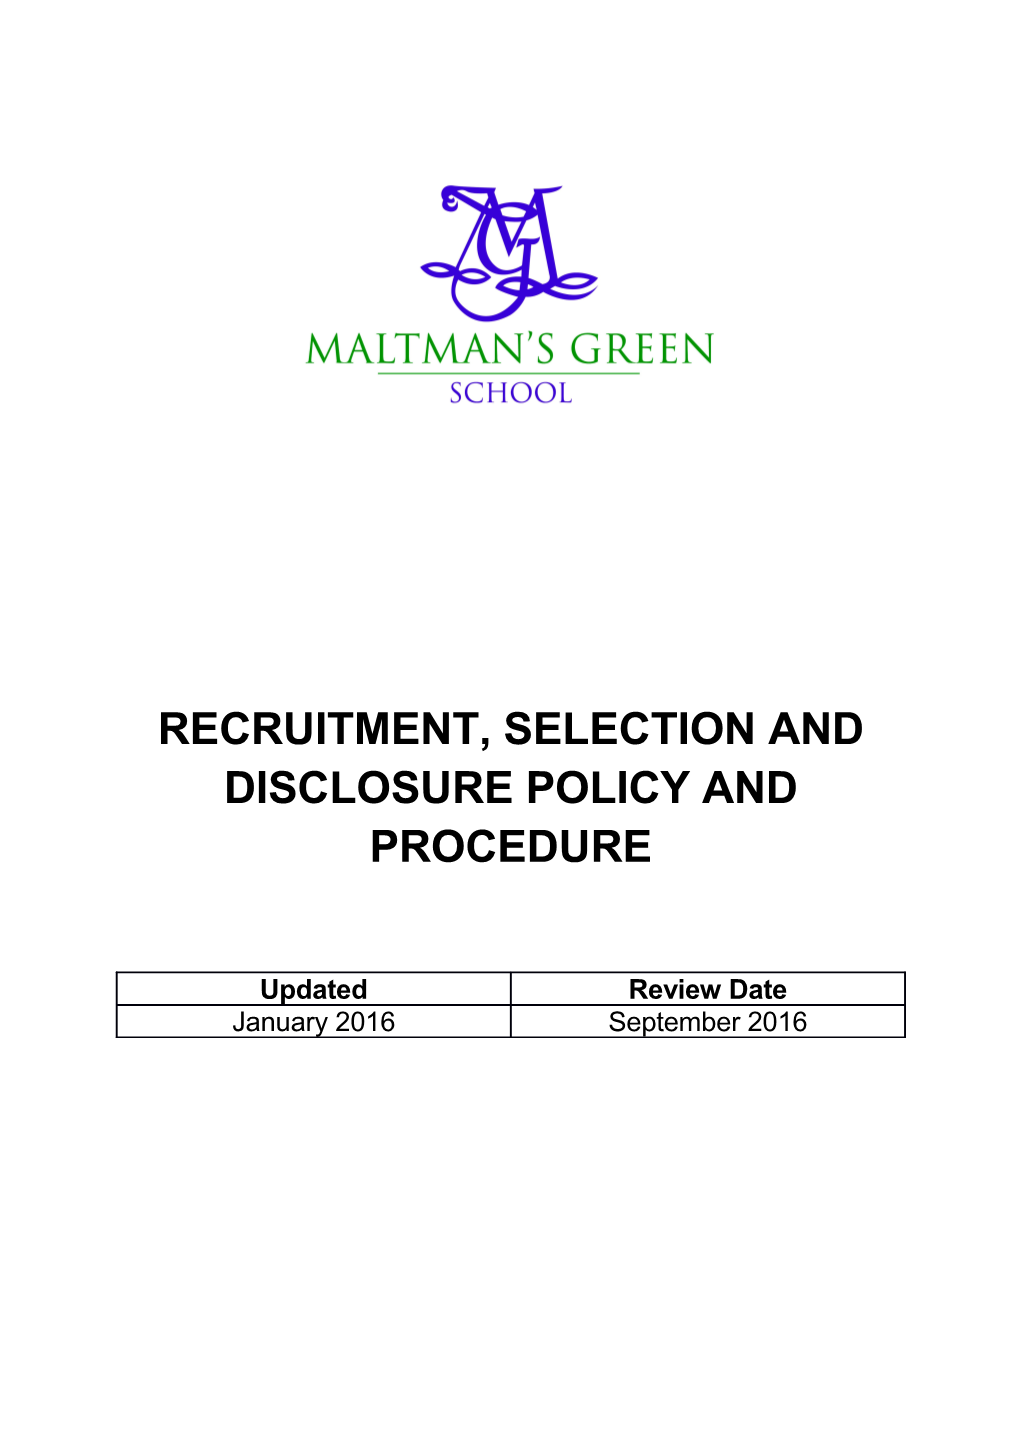 Recruitment, Selection and Disclosure Policy and Procedure